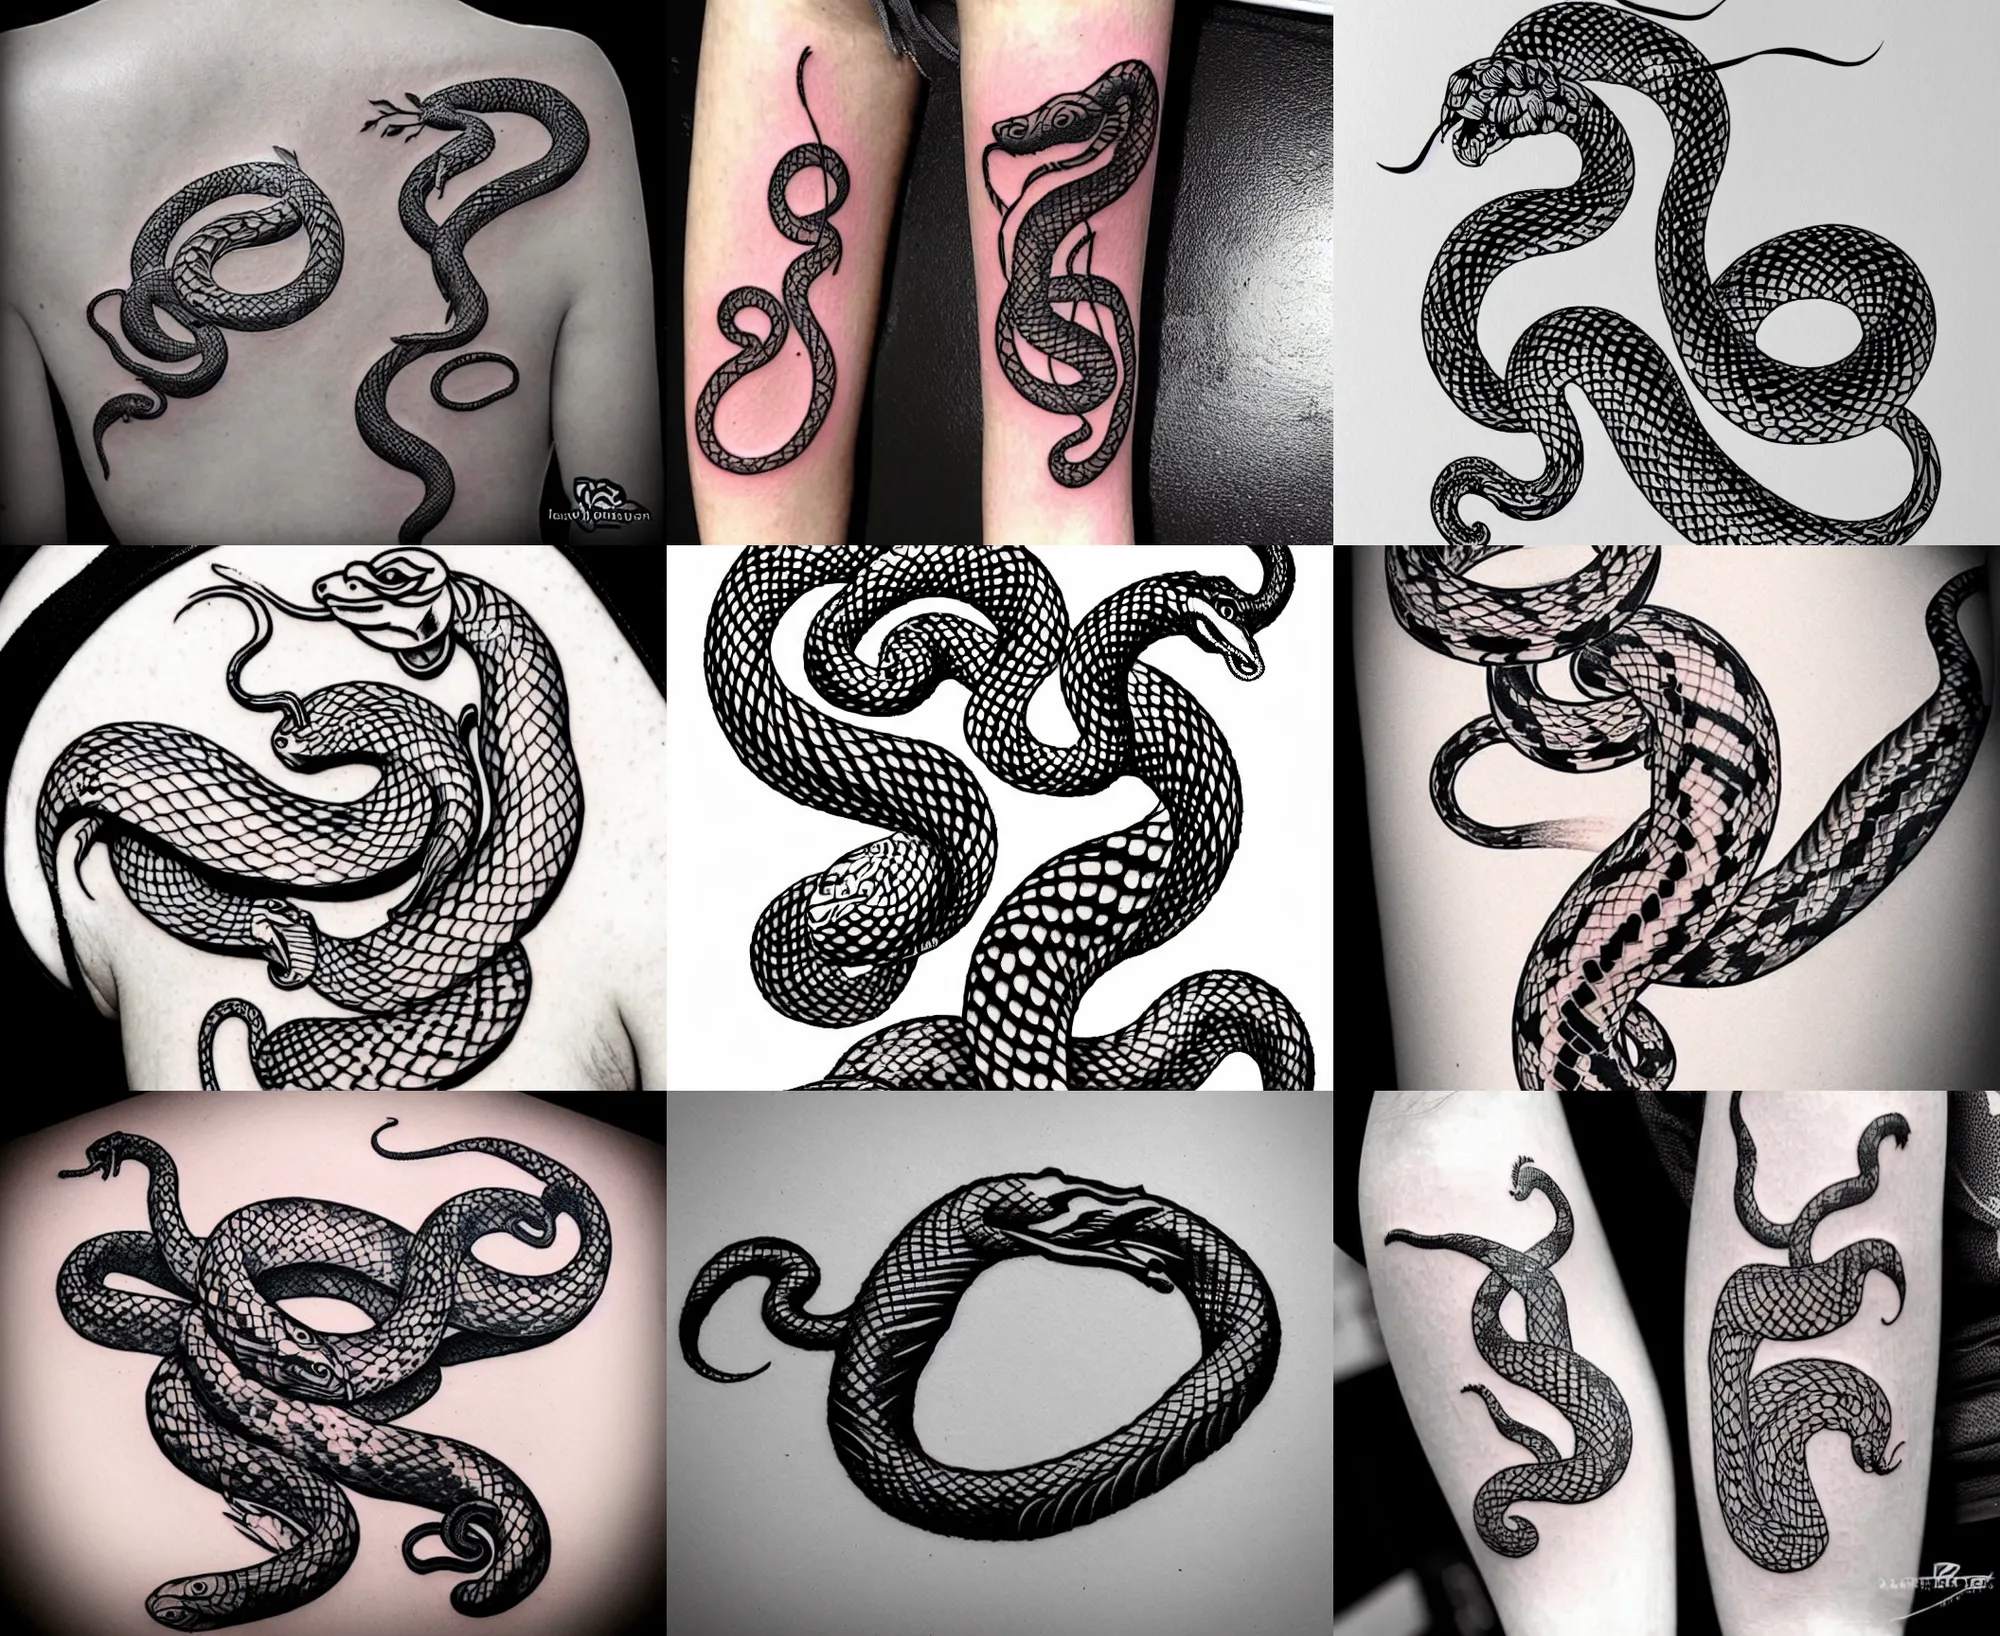 Is it possible to make this snake tattoo more dimensional/dynamic?  Reference image provided. It looks quite flat in comparison. Thoughts or  advice on possible improvements? : r/TattooDesigns